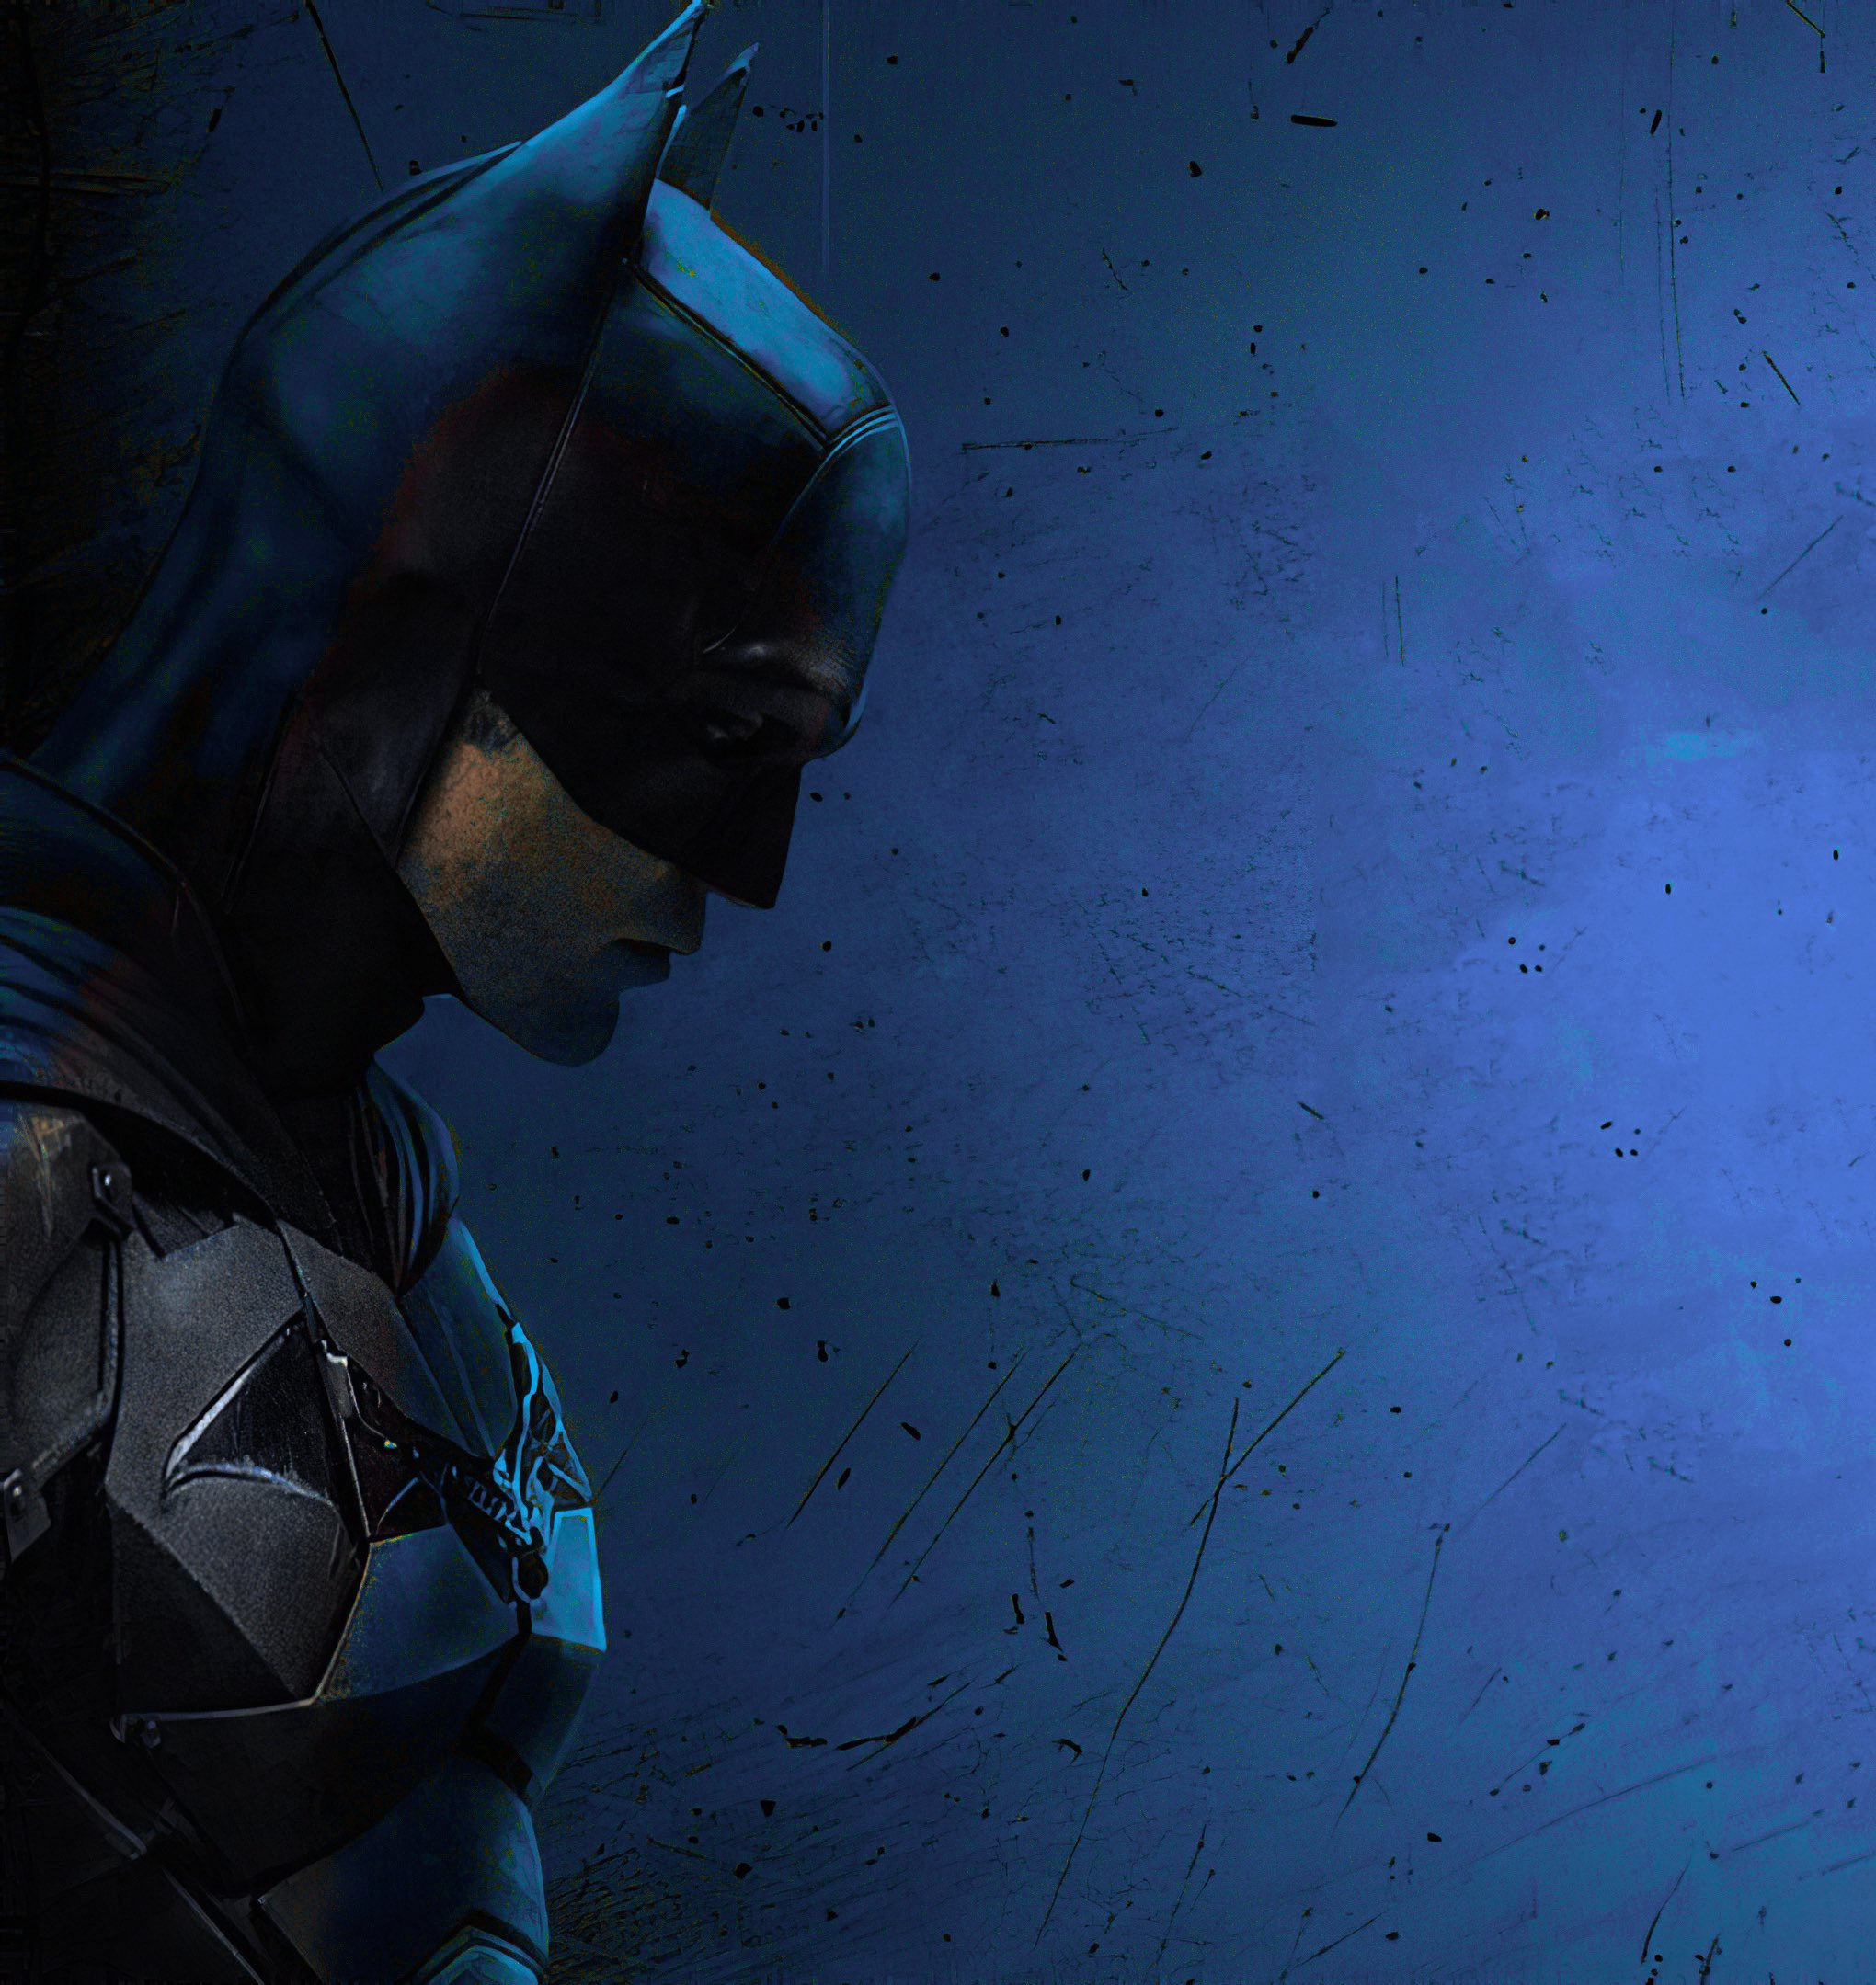 Younis On The Batman Having Blue As Theme For